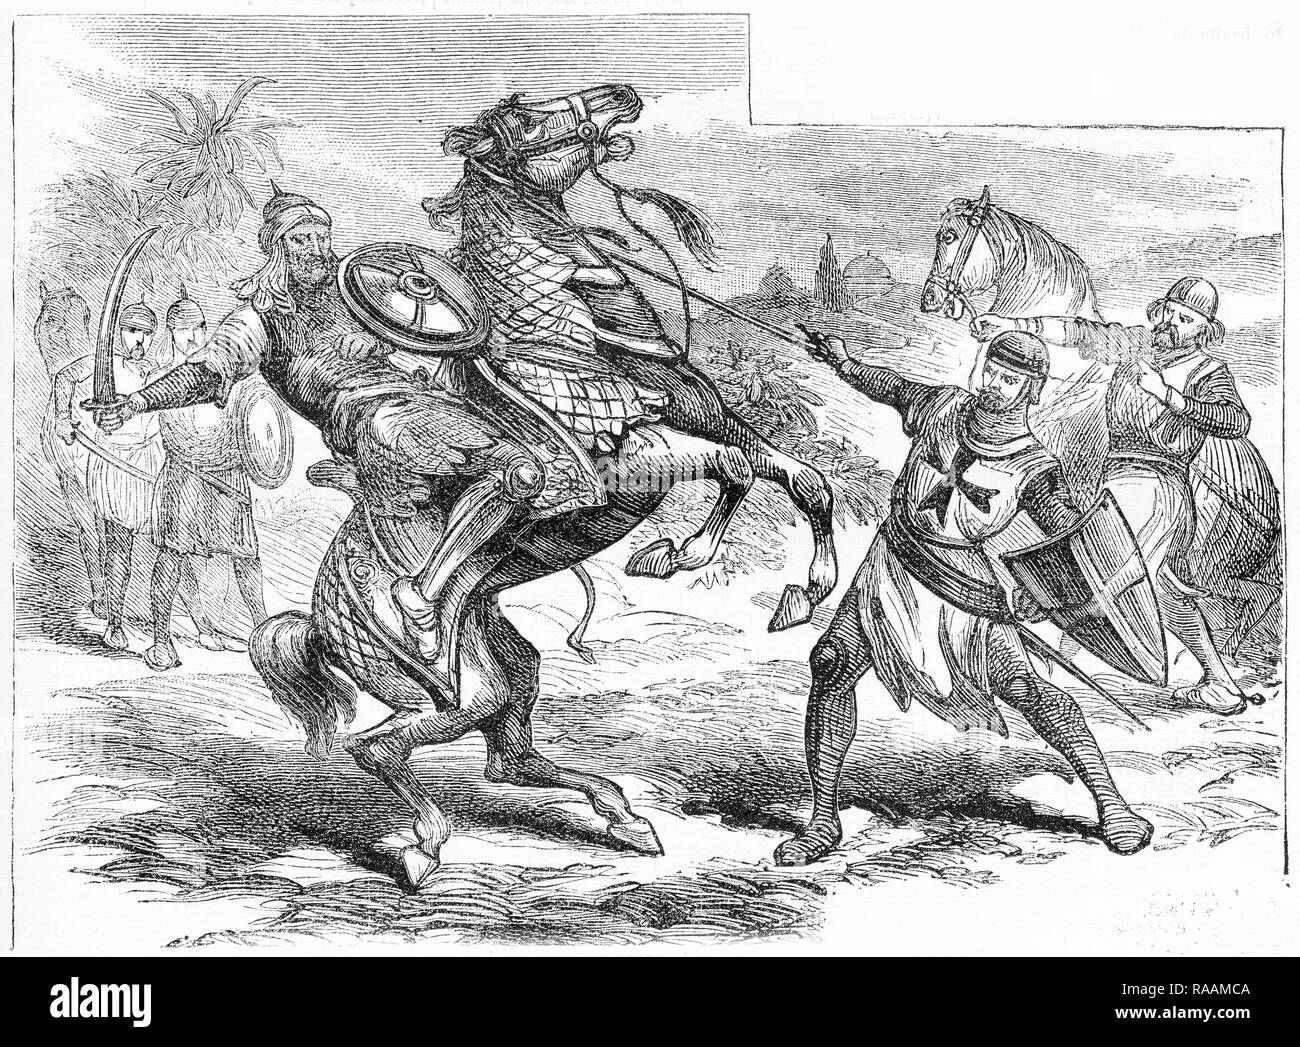 Engraving of a knight and a saracen fighting during the crusades. From an original engraving in the Boys of England magazine 1894. Stock Photo